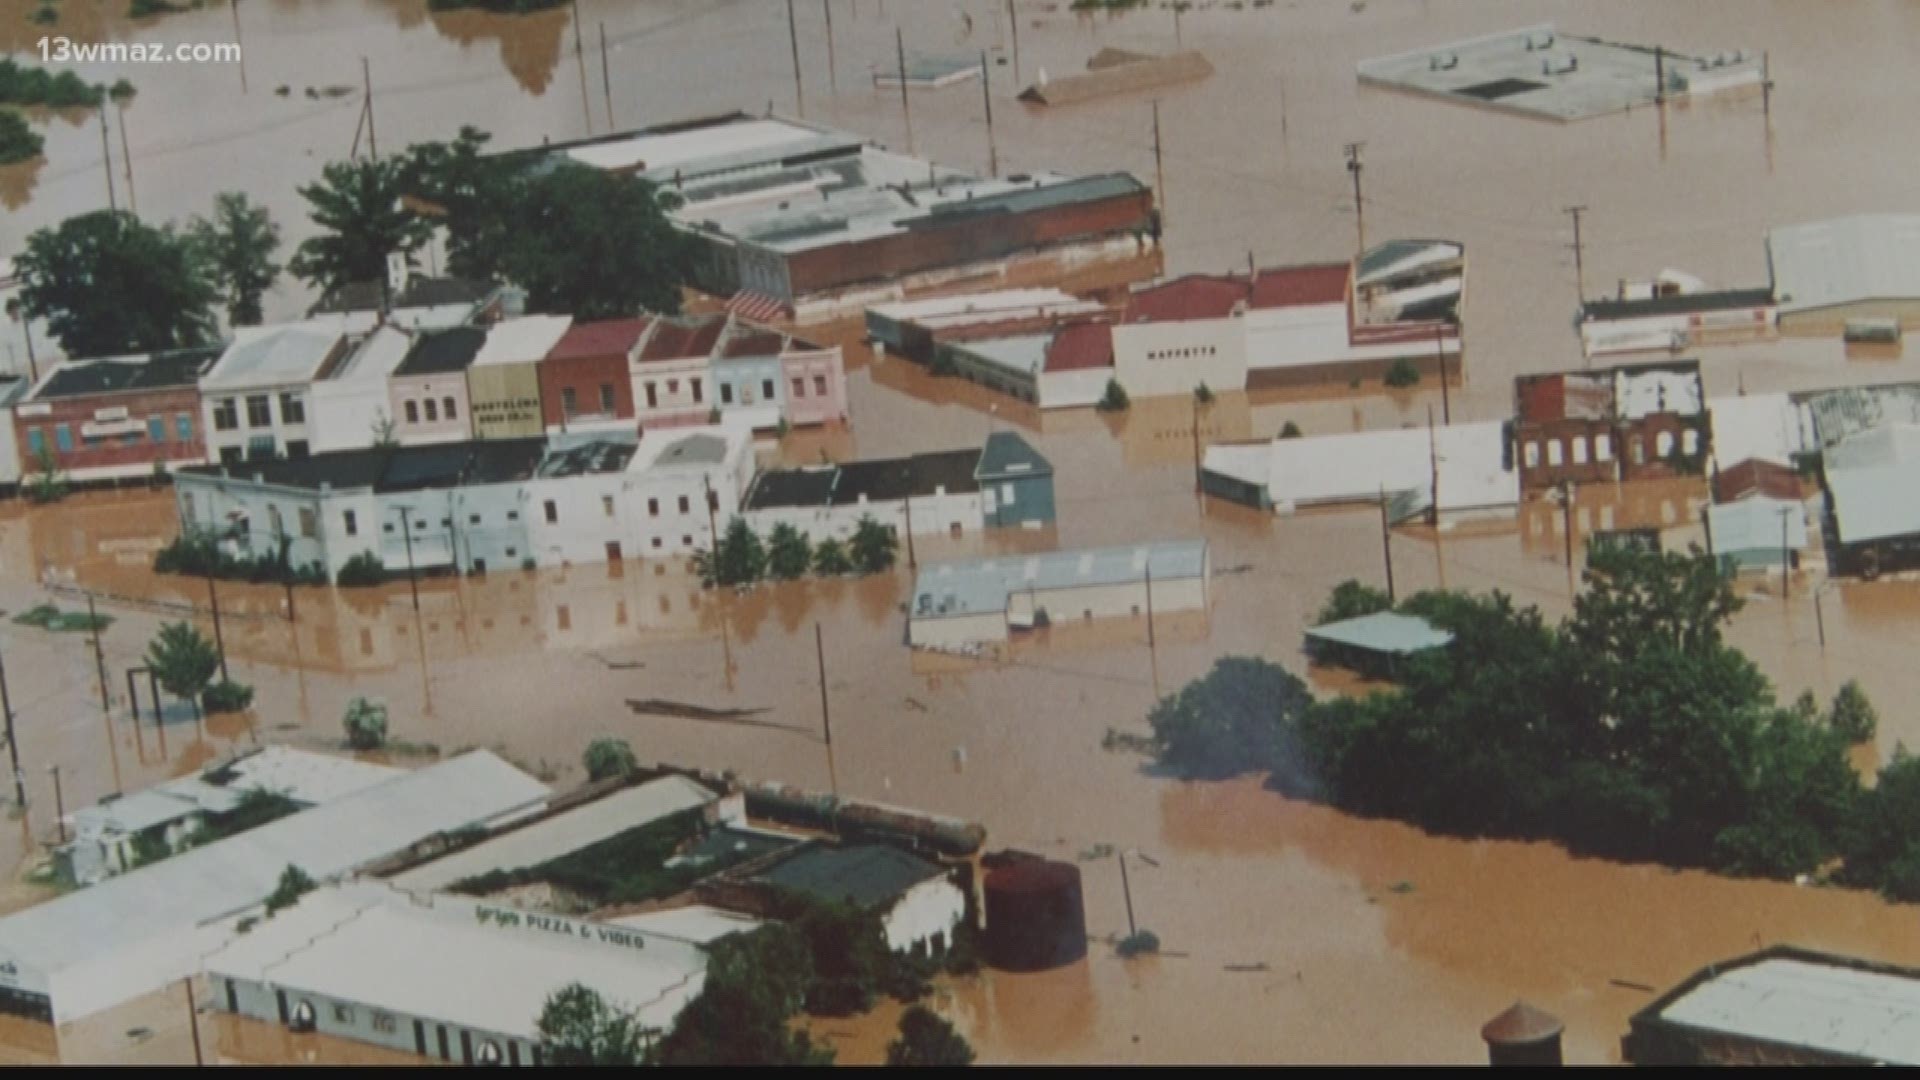 Downtown Montezuma had two catastrophic incidents happen during the Flood of '94 that put their entire town underwater from Alberto. Suzanne Lawler shows you how in some ways the scars and the successes  are still evident today.